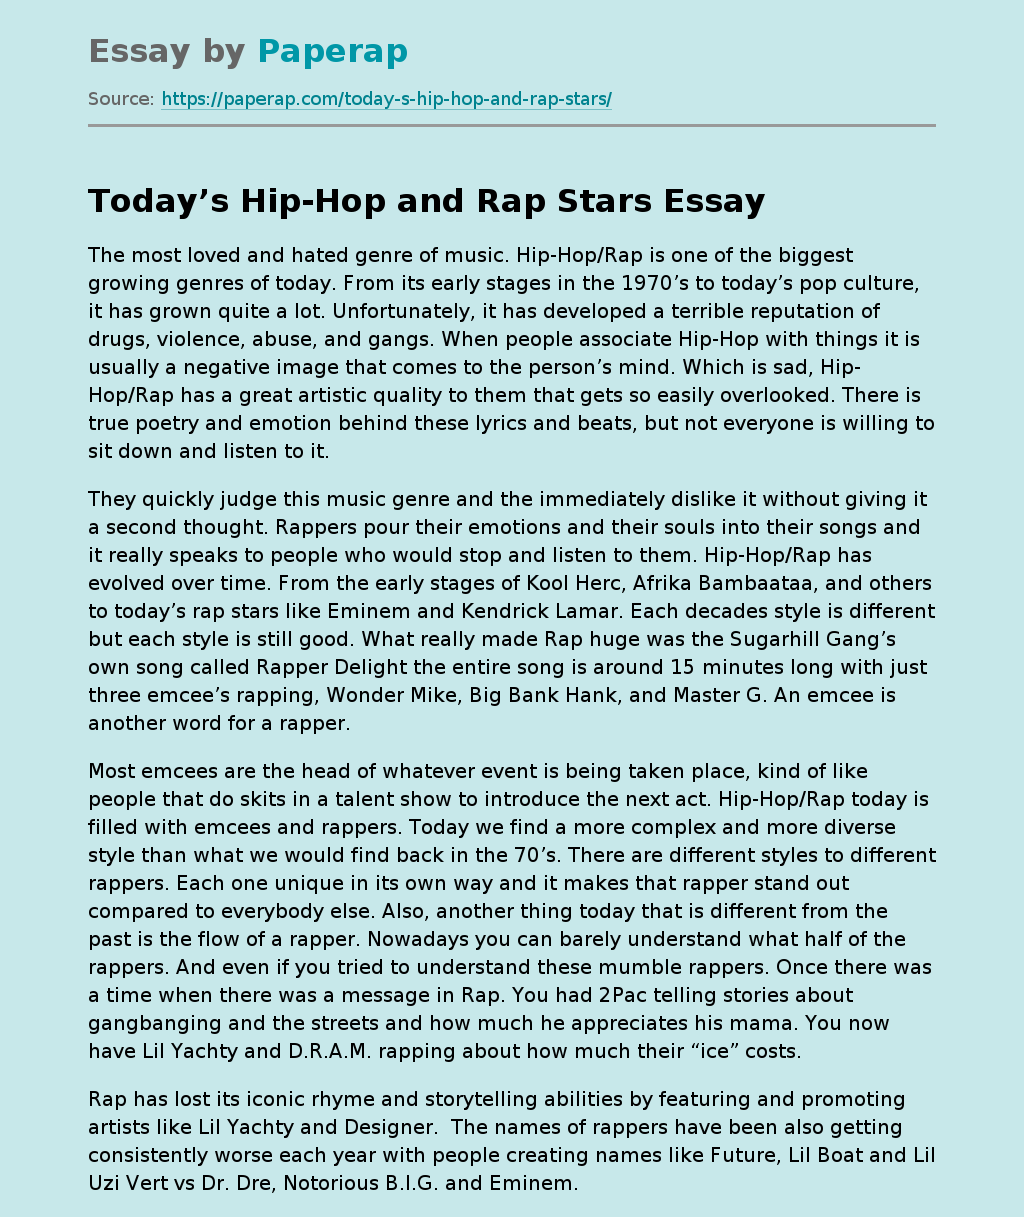 Today’s Hip-Hop and Rap Stars